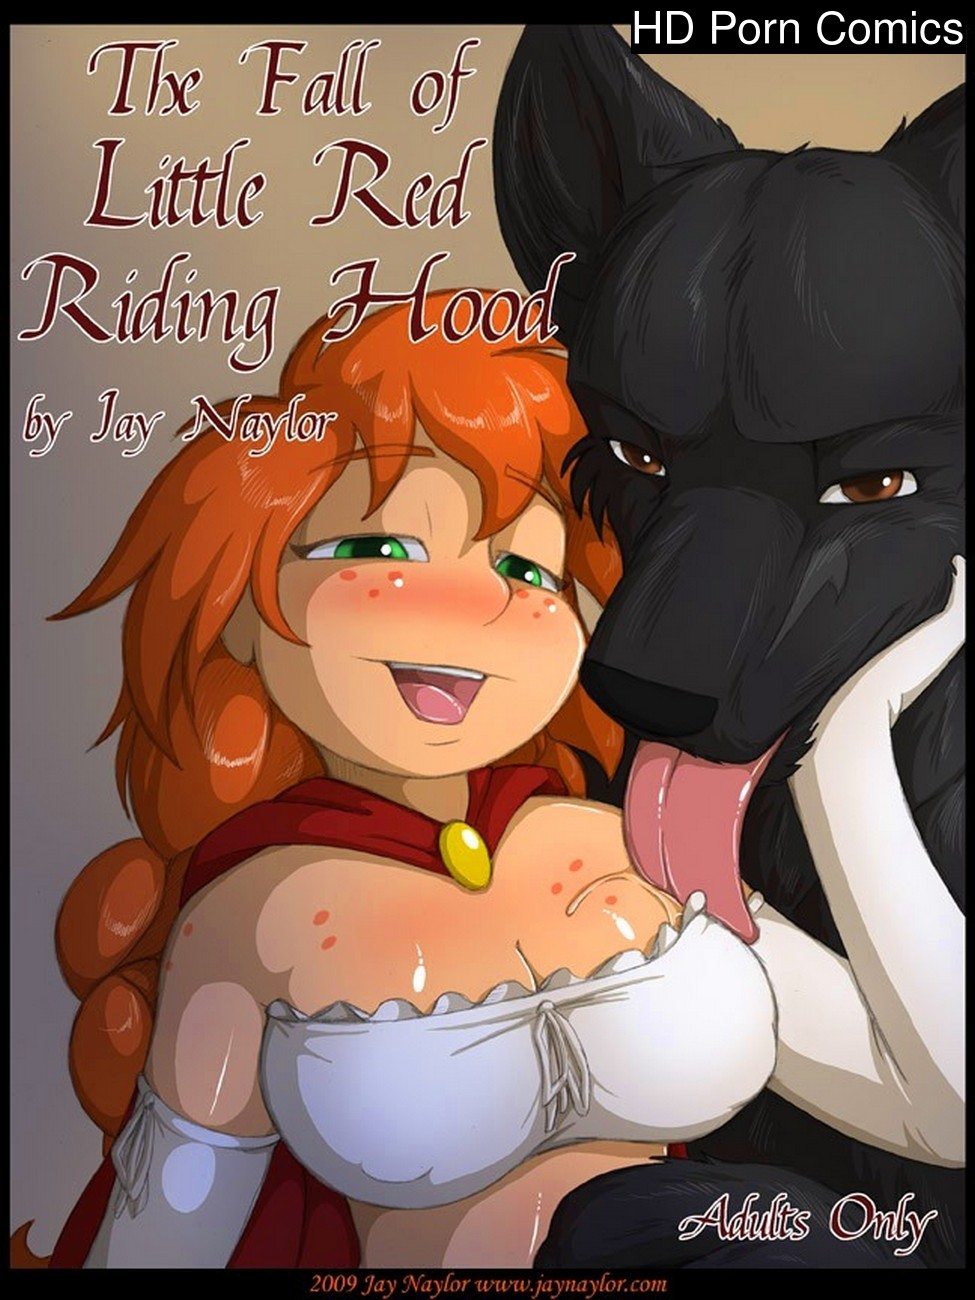 Red Riding Hood Shemale Cock - The Fall Of Little Red Riding Hood 1 Sex Comic | HD Porn Comics